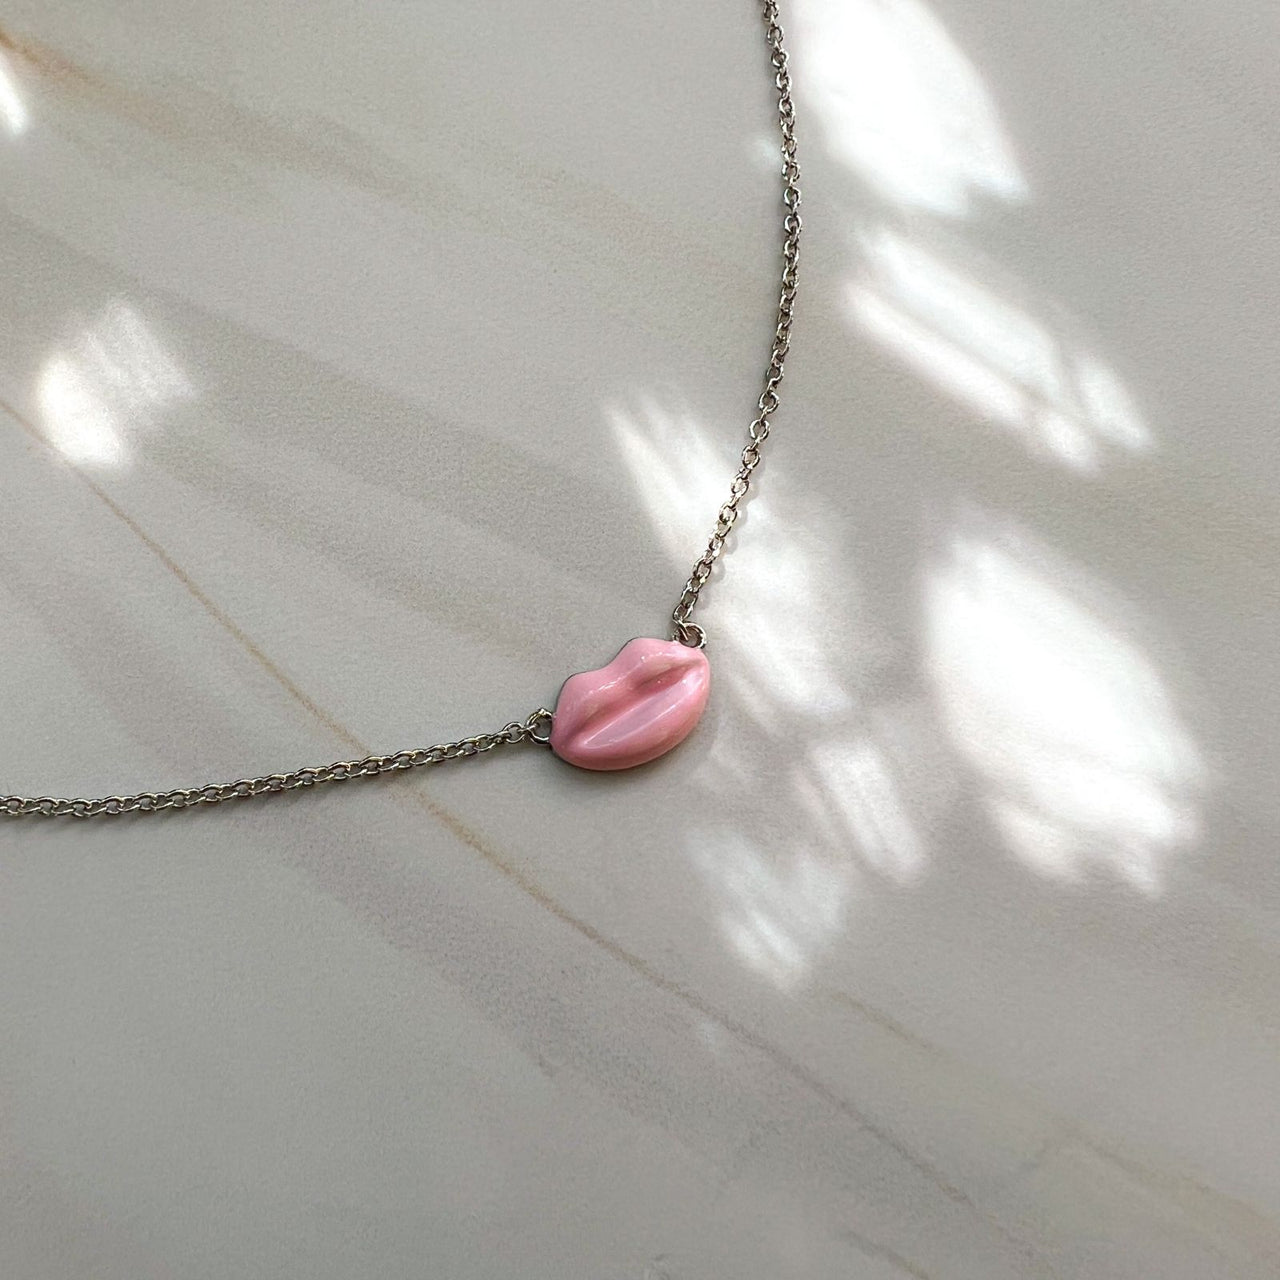 Cute Lips necklace (78)